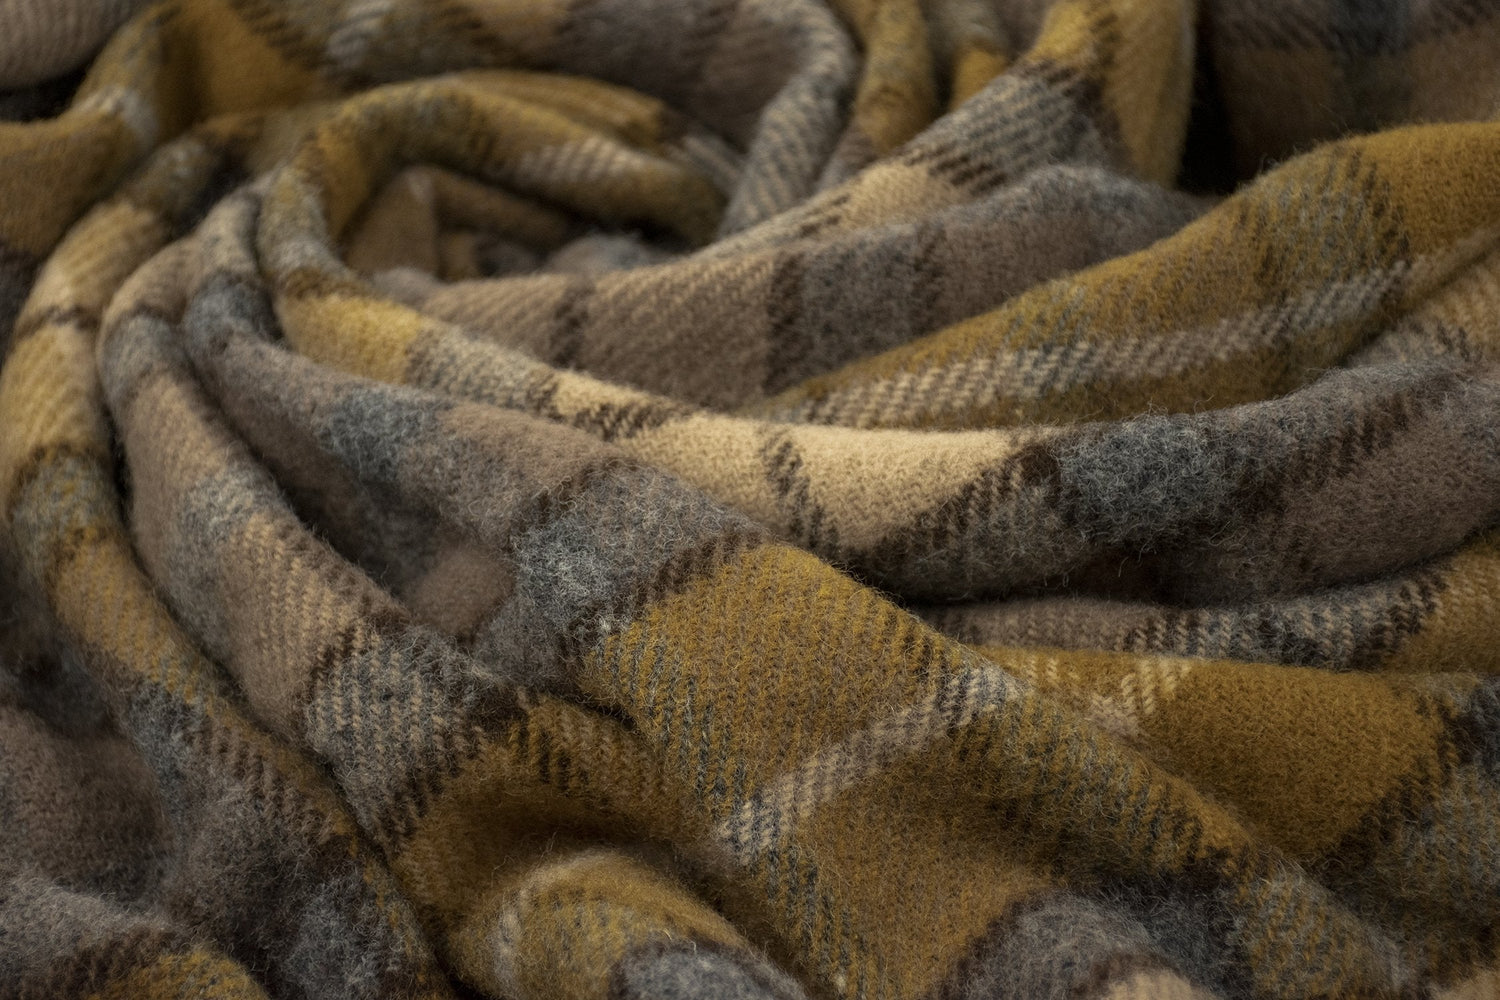 Prince of Scots Highland Tweed Pure New Wool Fluffy Throw ~ Natural Buchanan ~-Throws and Blankets-Prince of Scots-00810032750237-K40050018-003-Prince of Scots